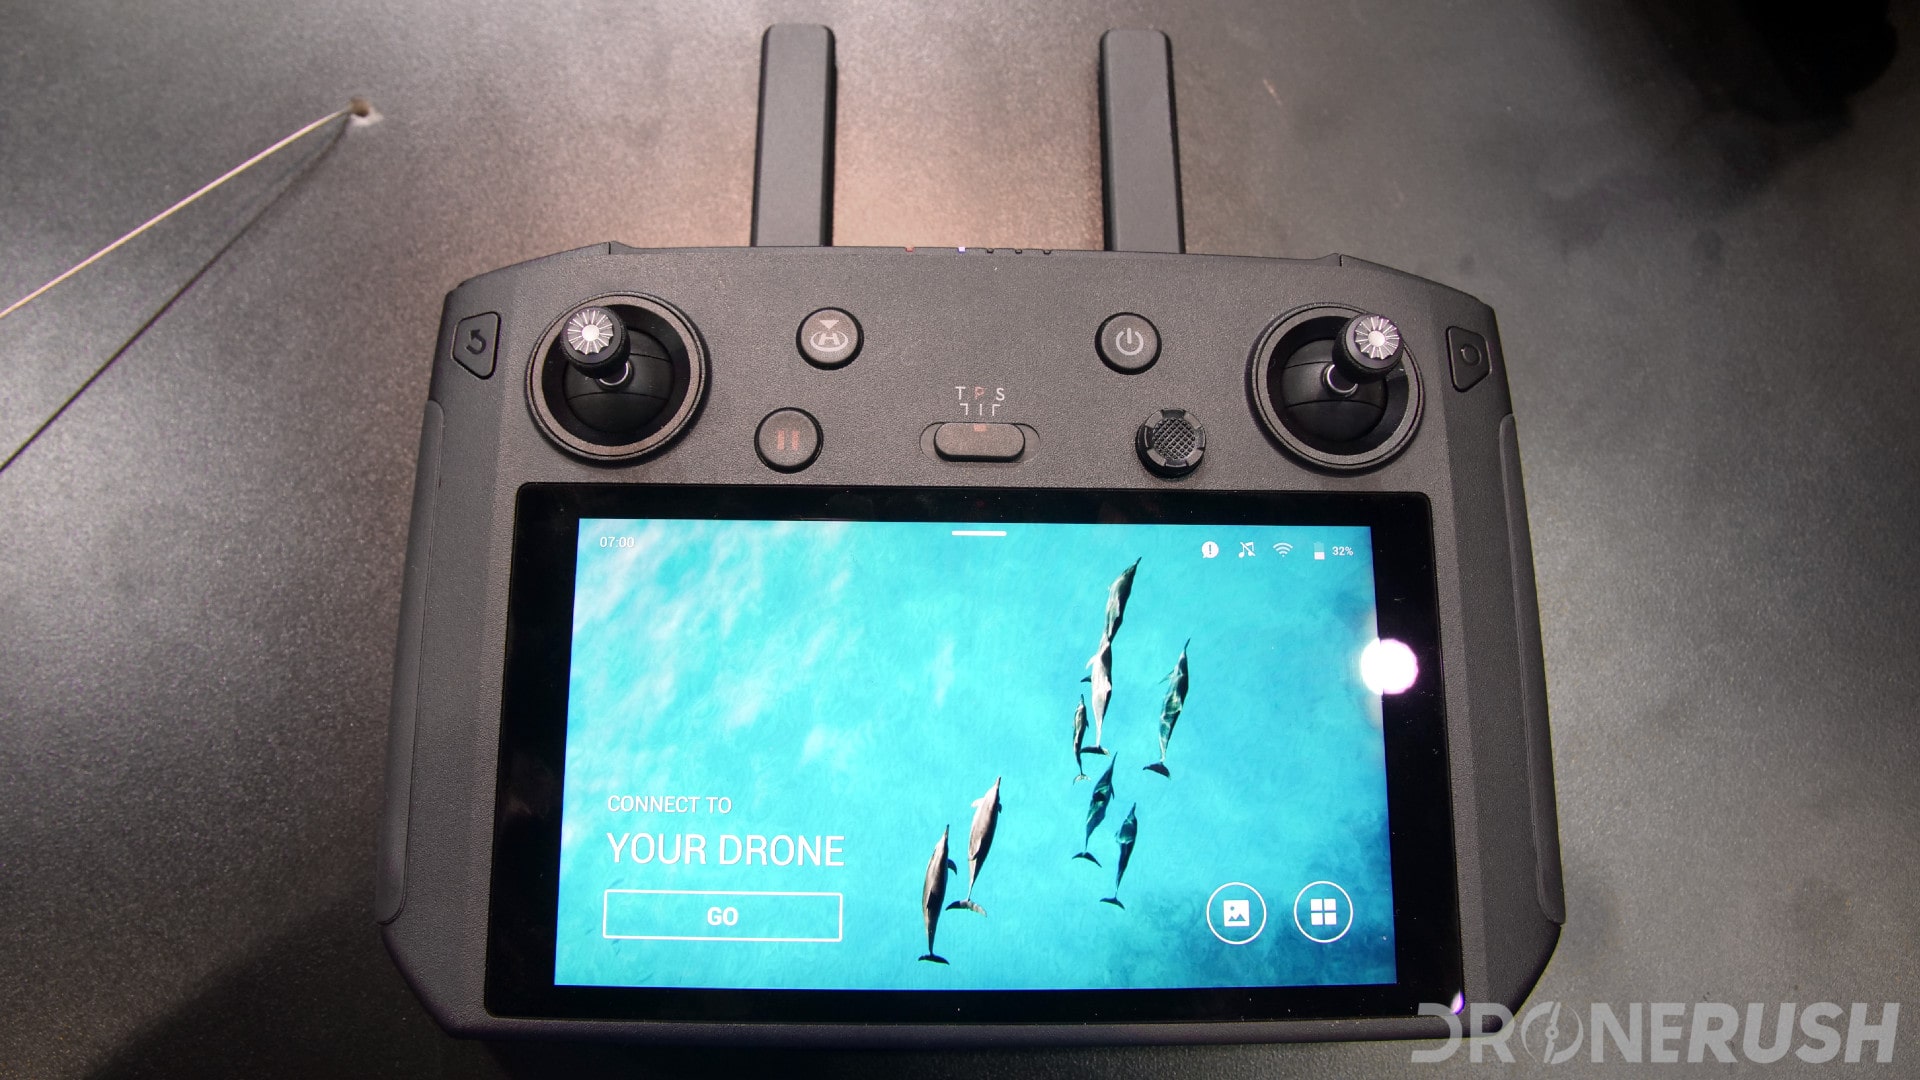 DJI Inspire 2 controller with screen and drone app. DJI smart remote controller.